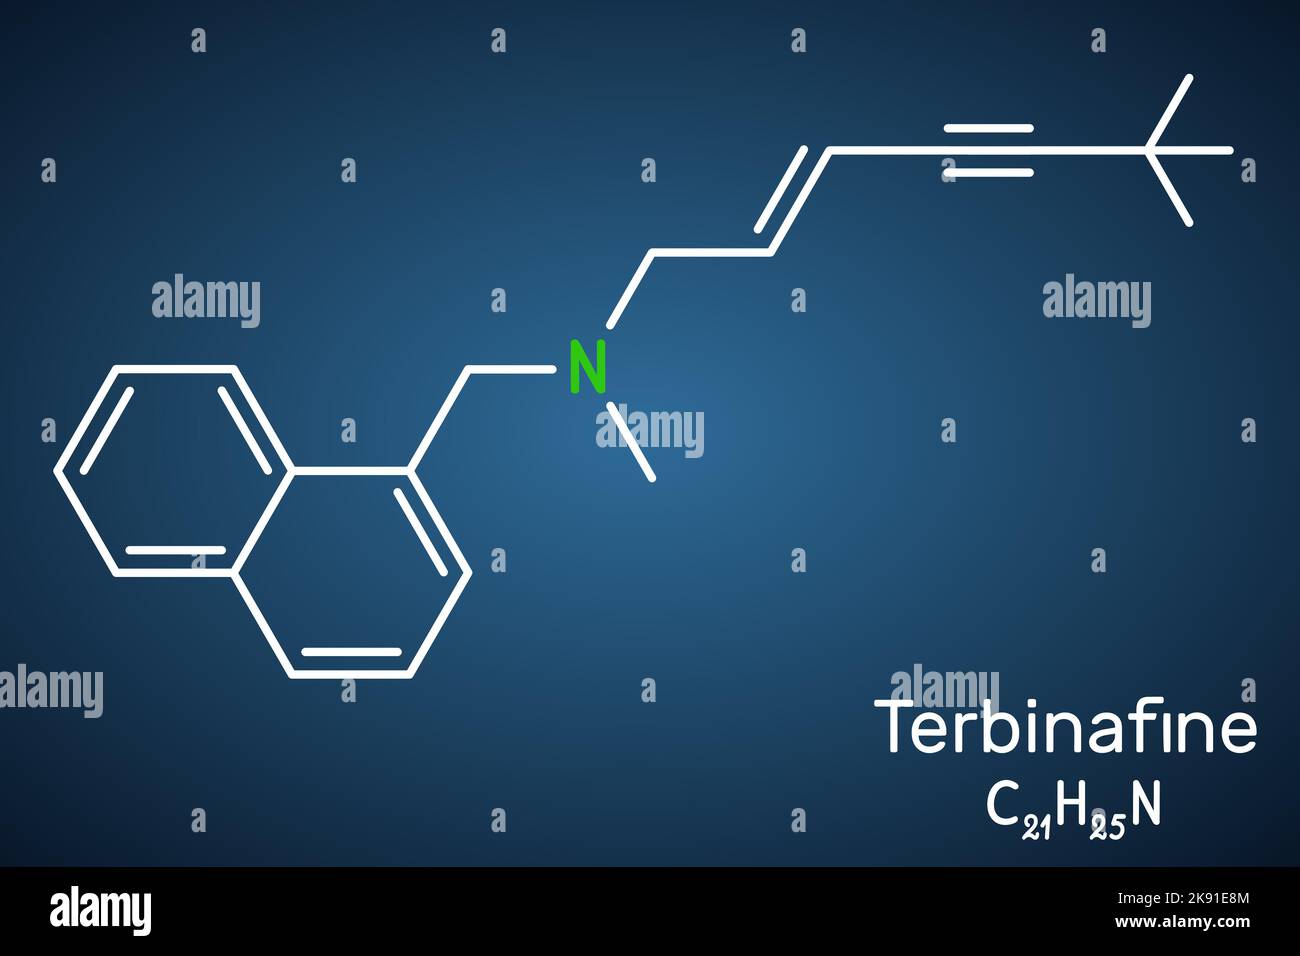 Terbinafine molecule. Structural chemical formula on the dark blue background Stock Vector